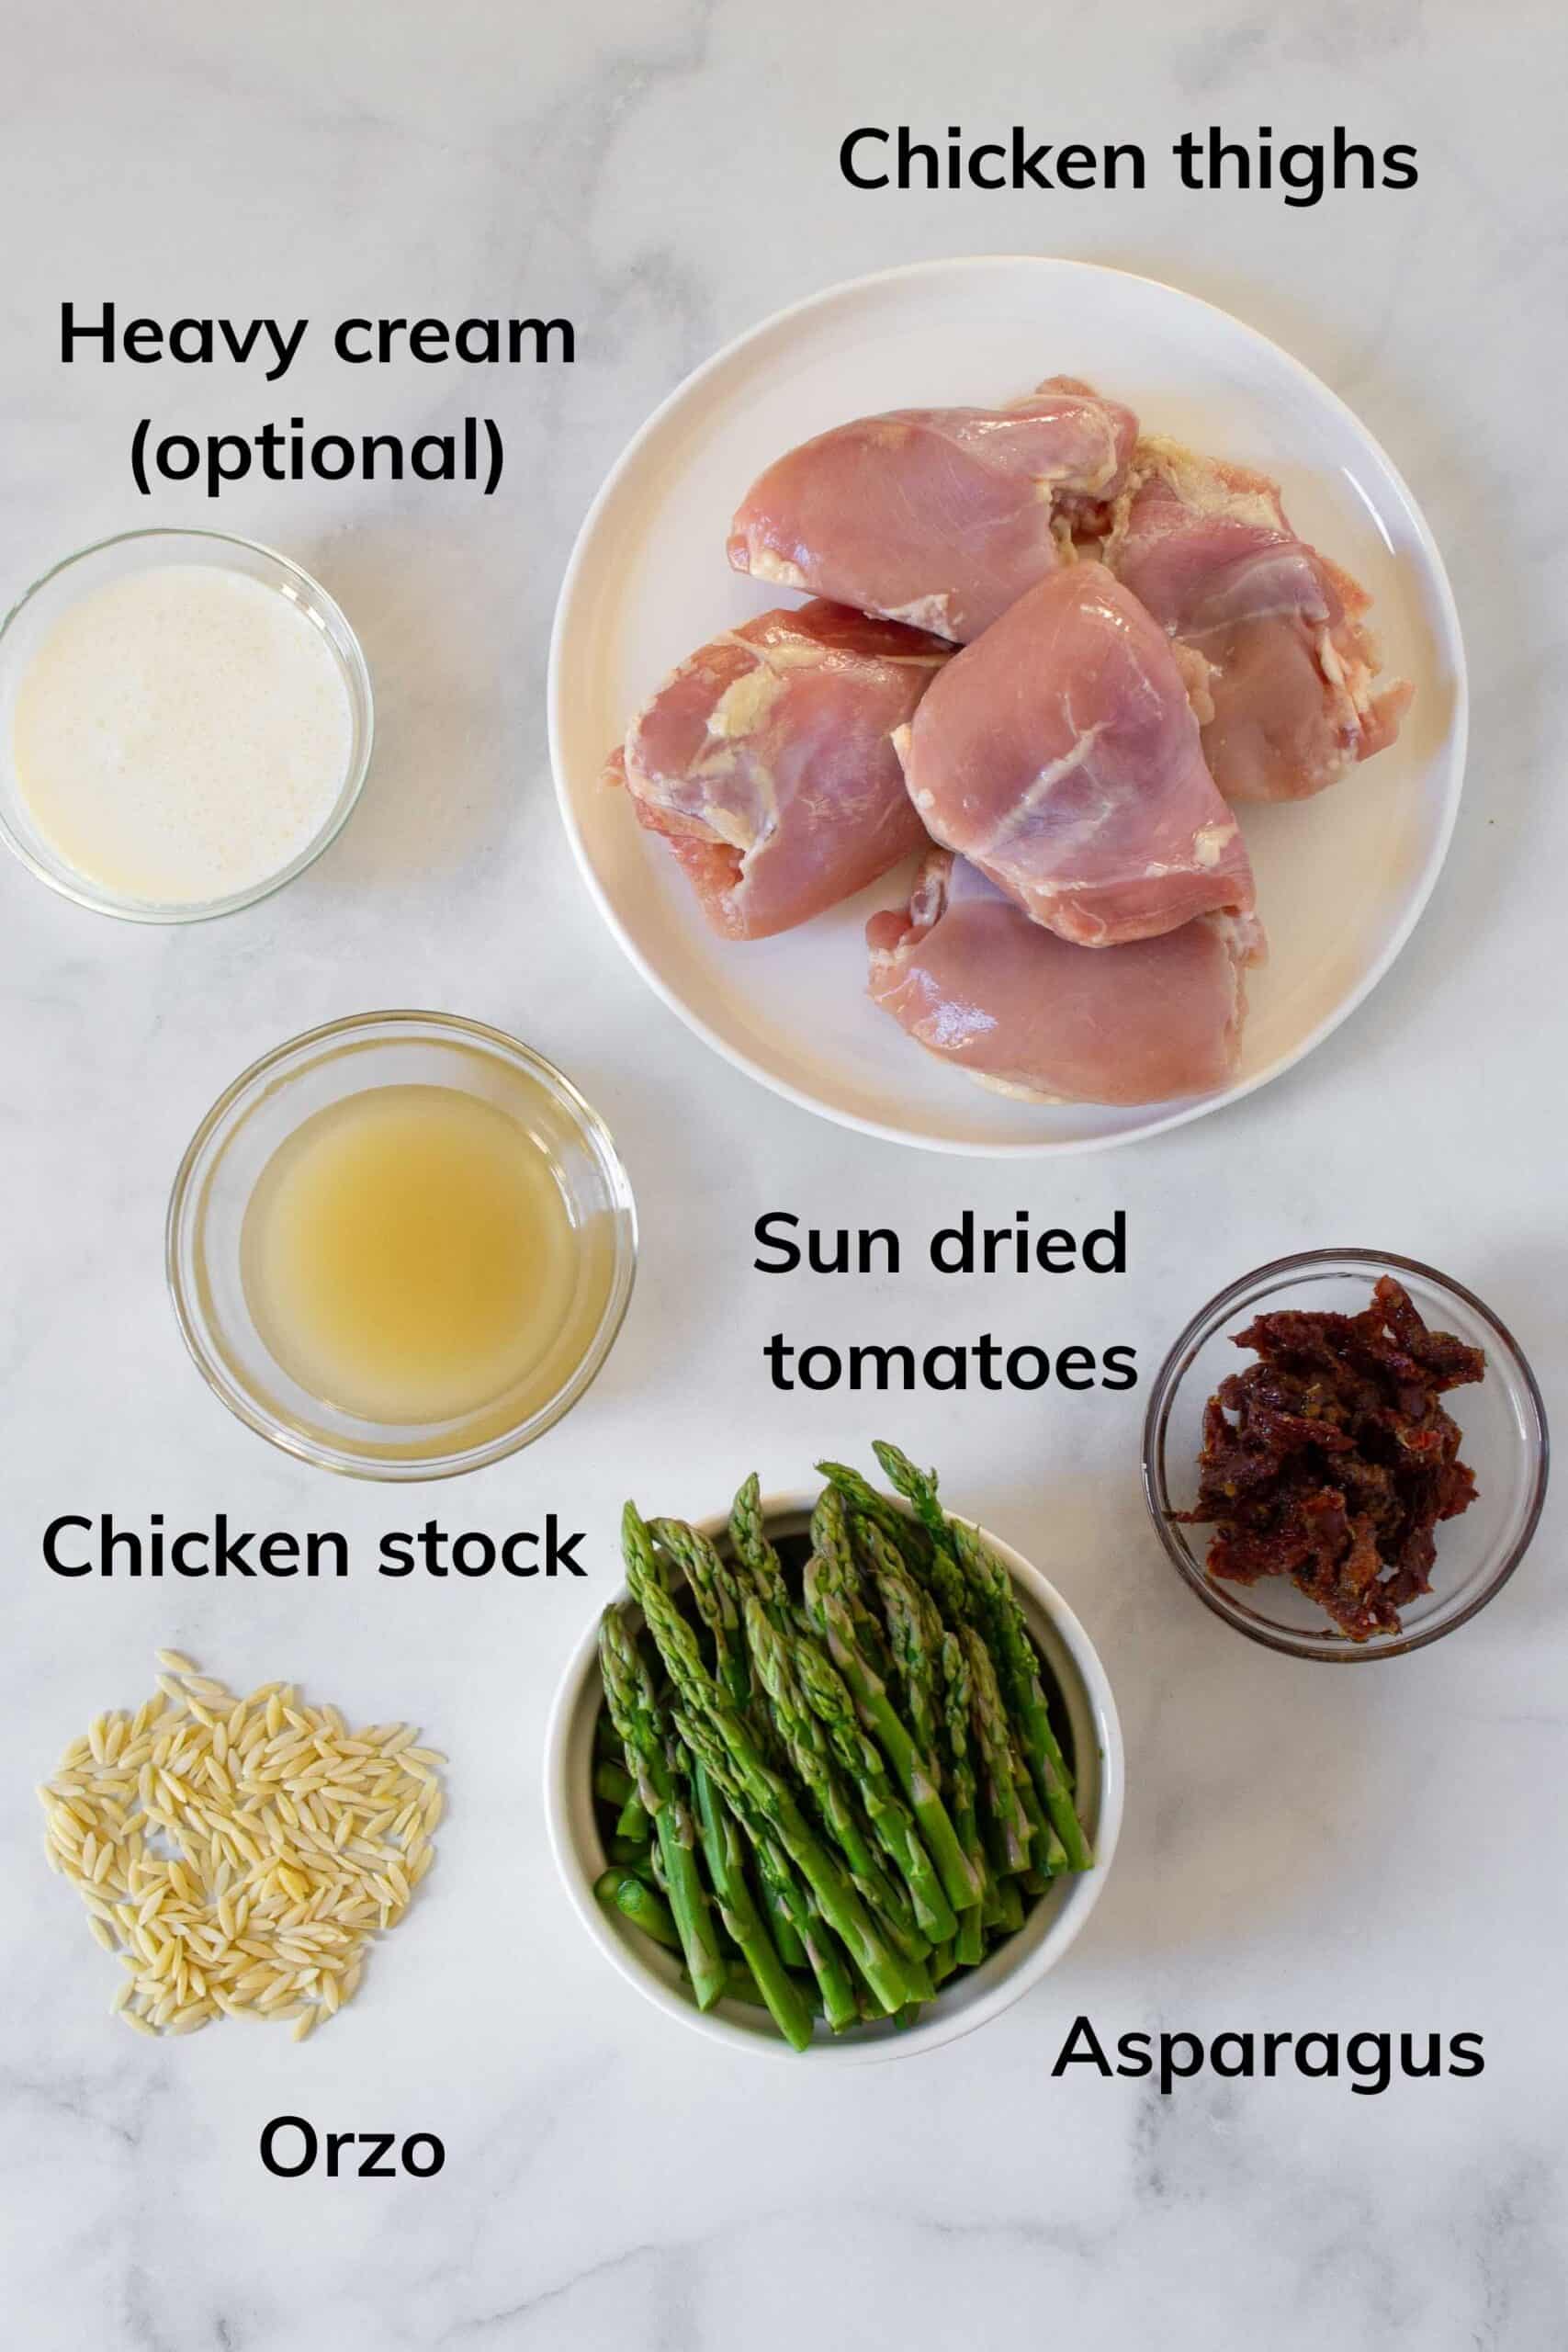 Photo of the 6 ingredients you need to make this creamy chicken orzo: Orzo, Chicken, heavy cream (optional), asparagus, sun dried tomatoes, and chicken stock